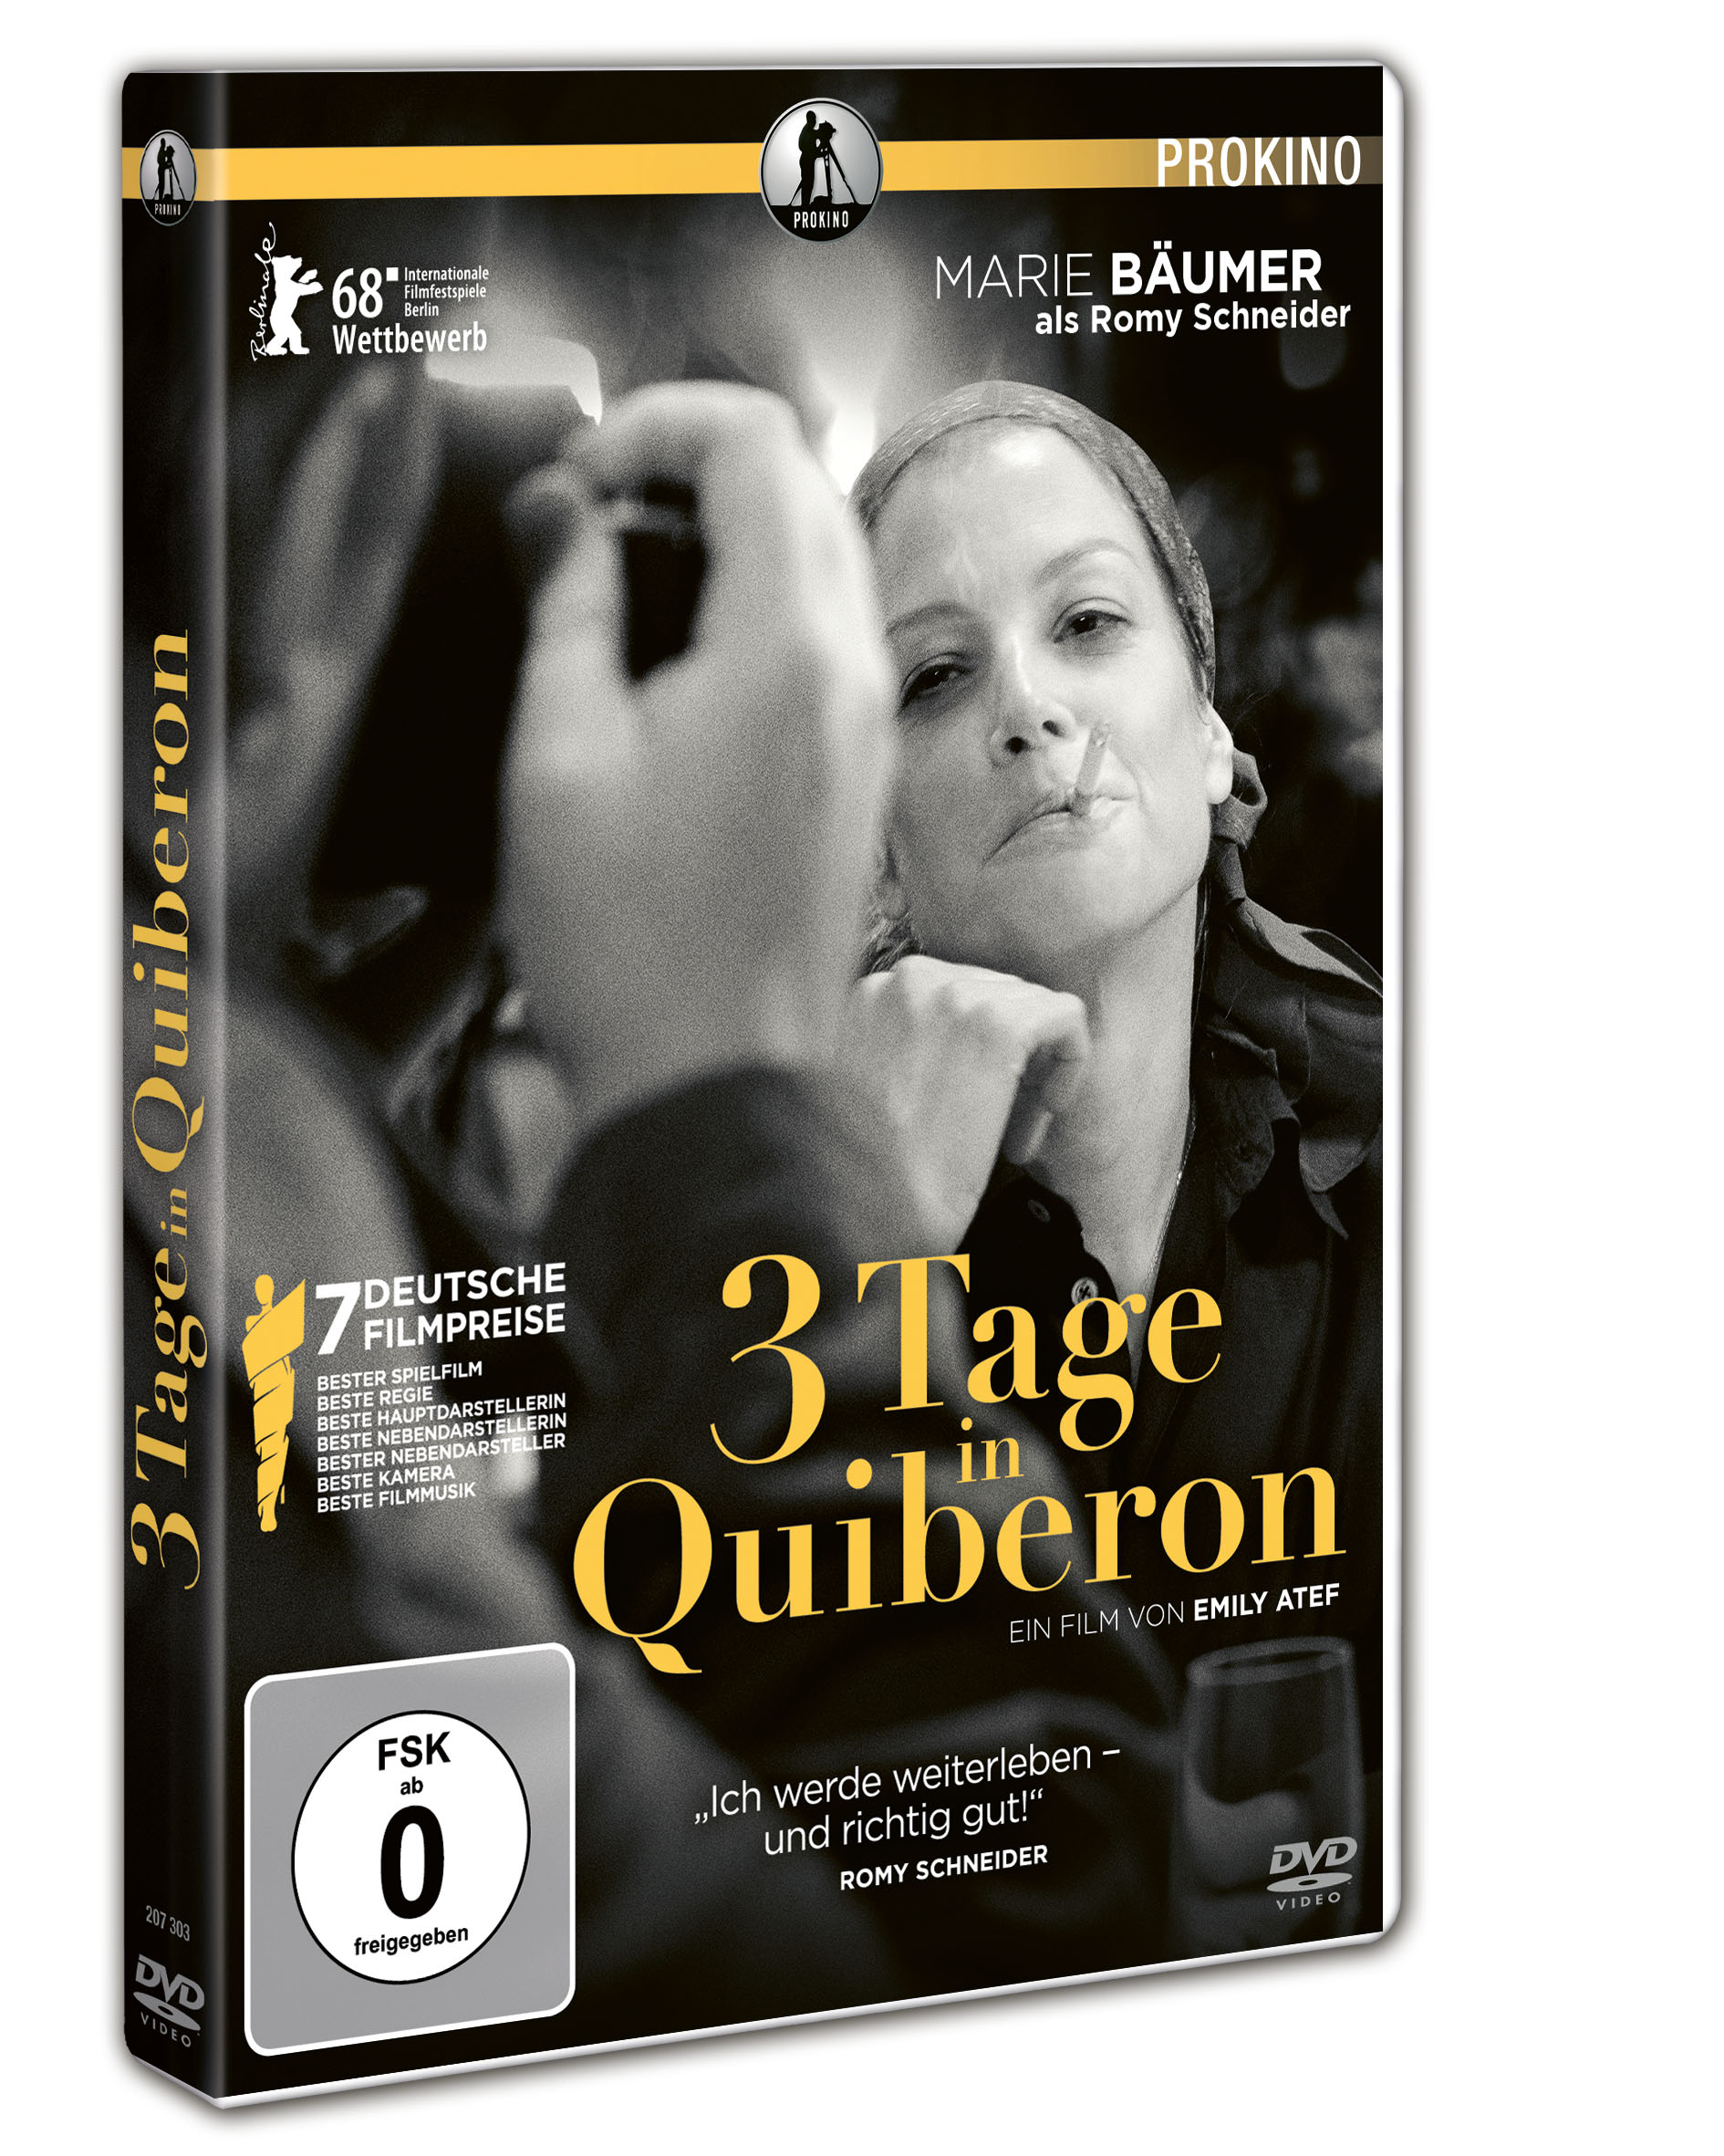 3 Tage in Quiberon - Special Edition (2 DVDs) Image 2